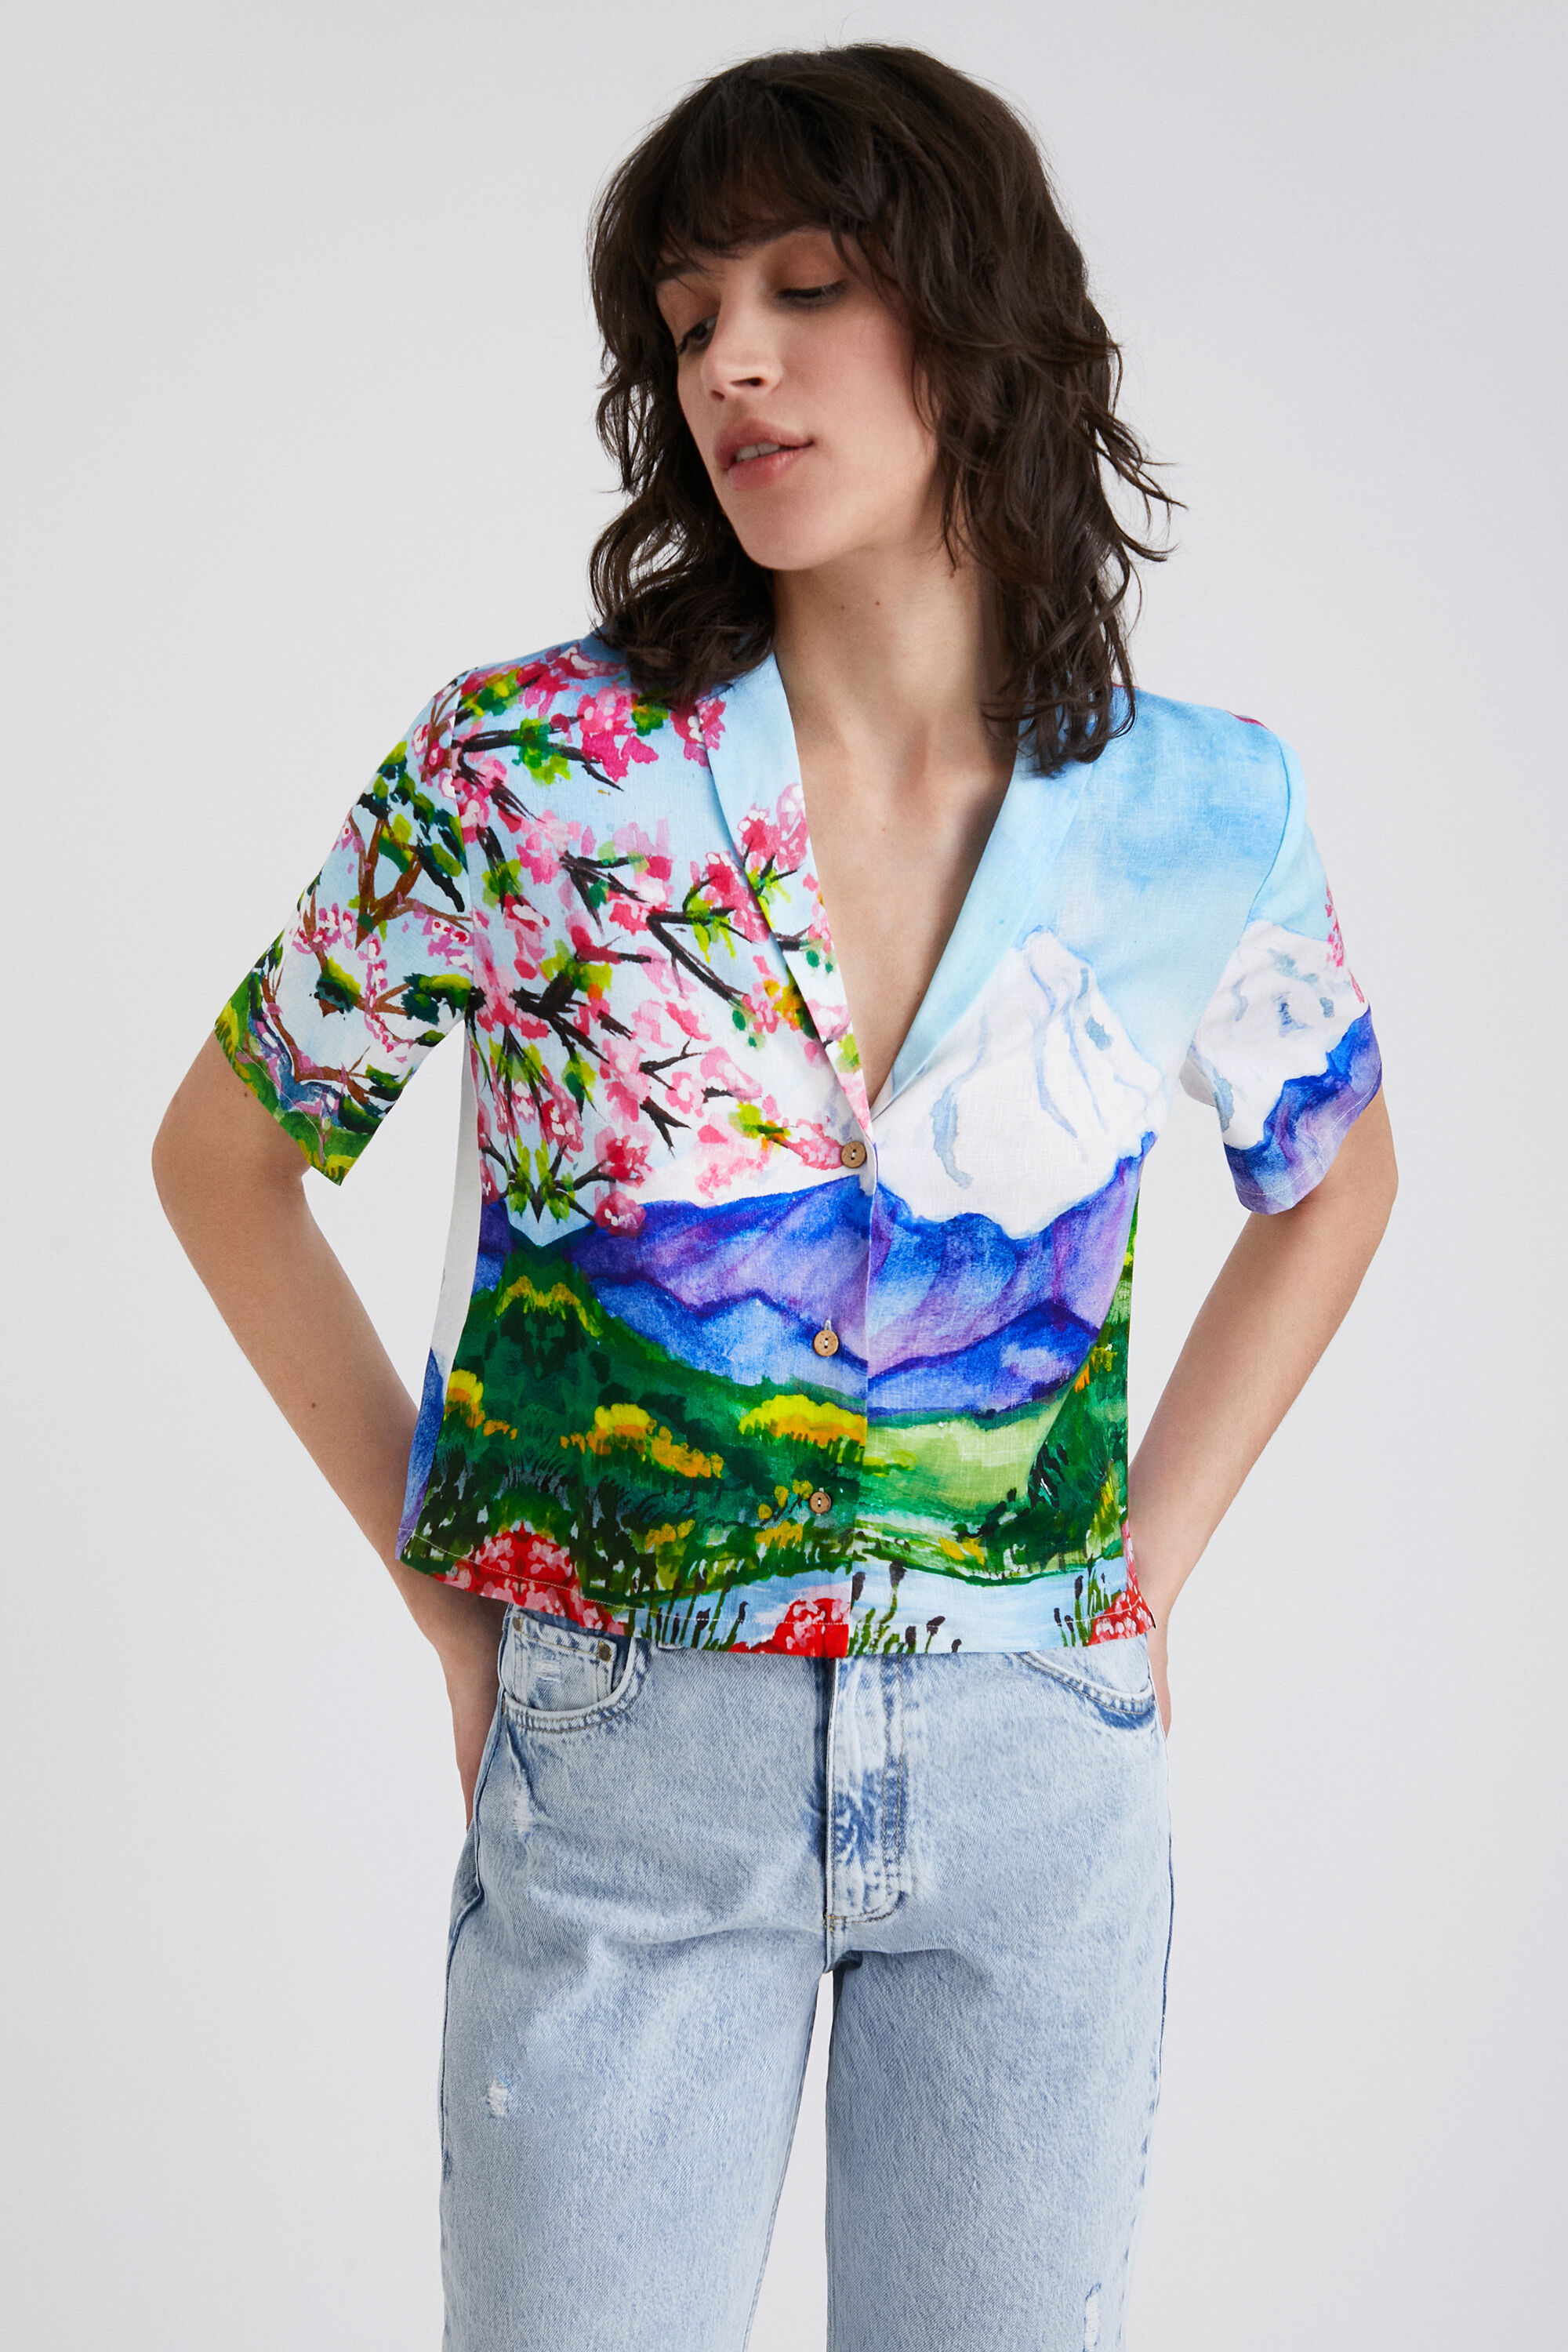 Women's Shirts and Blouses | Desigual